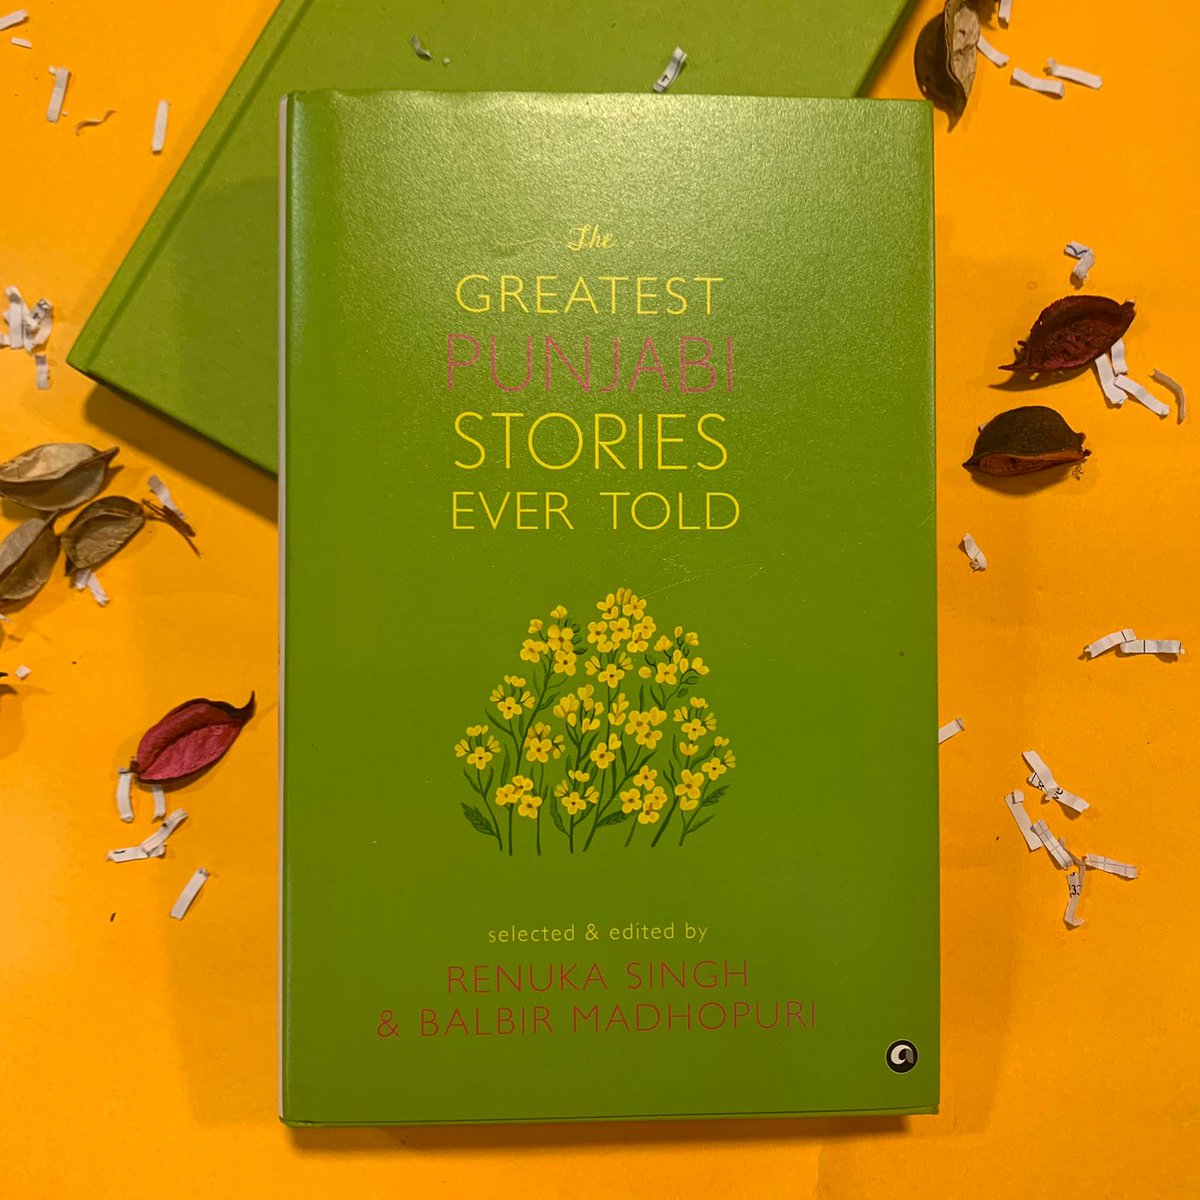 #TheGreatestPunjabiStoriesEverTold features some of the best short fiction to emerge from Punjab over the last century. Covering four generations of Punjabi writers, the anthology includes celebrated storytellers such as Gurbaksh Singh, Balwant Gargi, Sant Singh Sekhon, and…